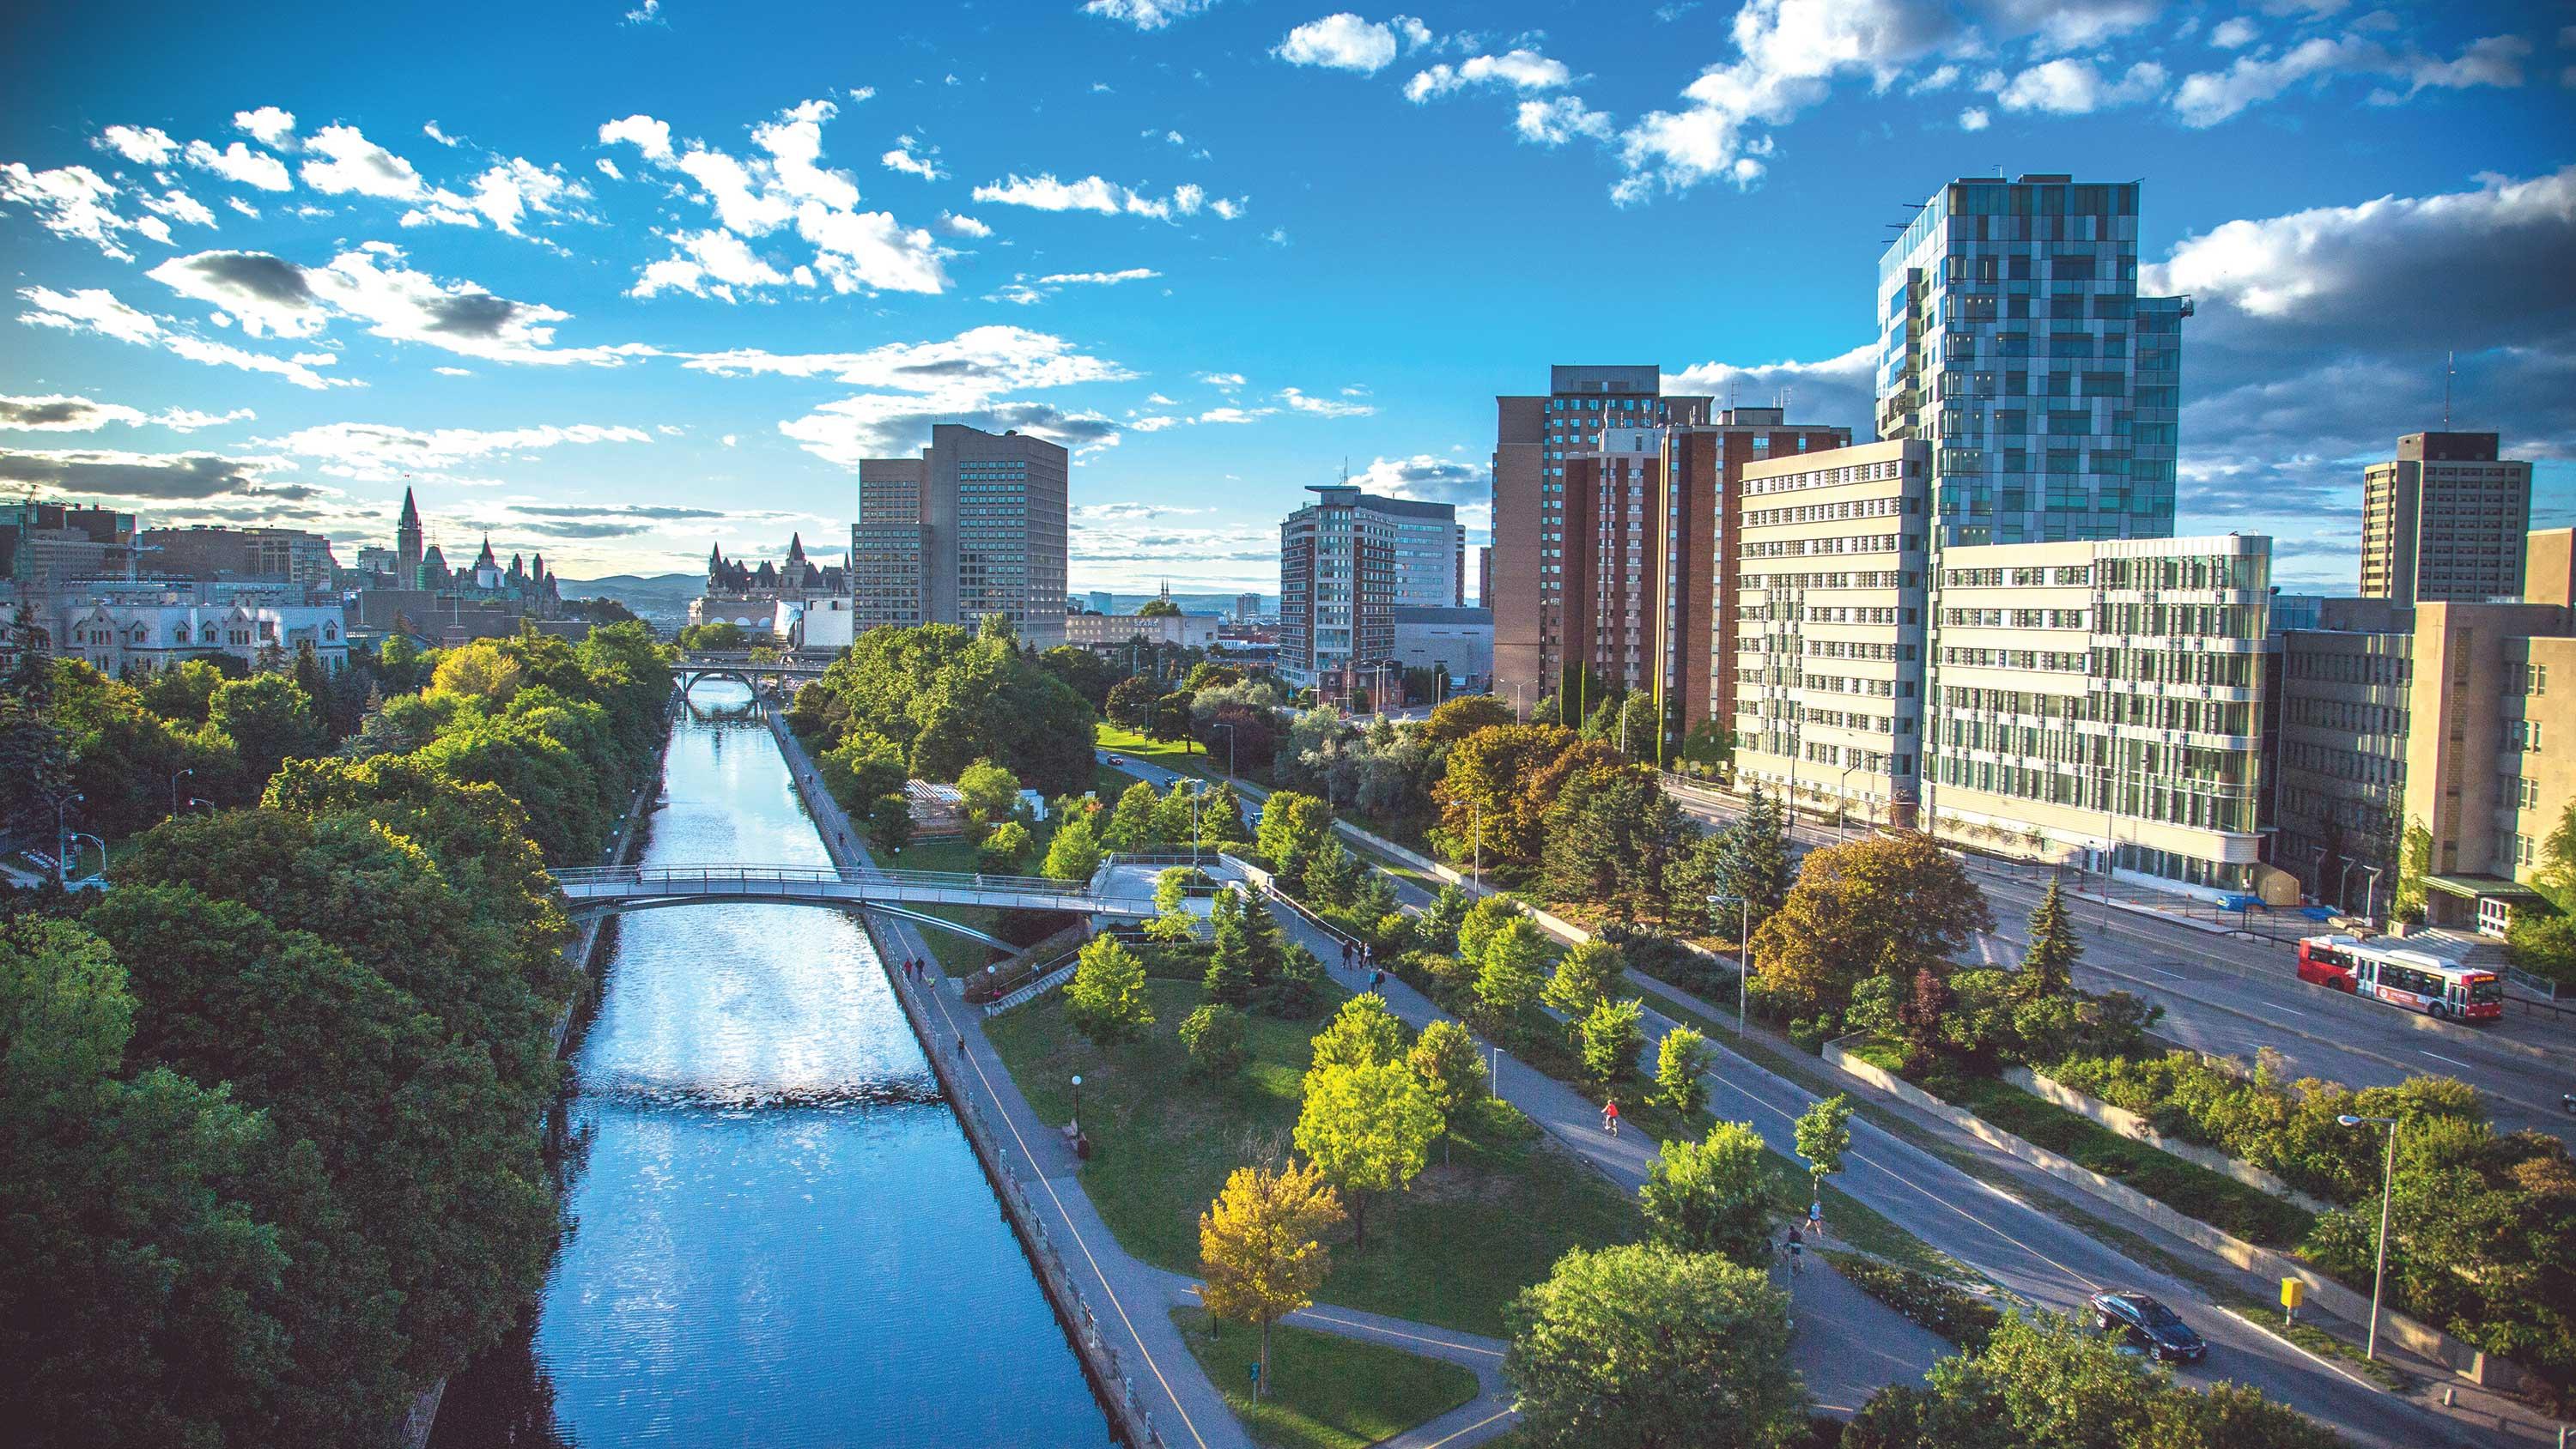 Rideau canal and campus